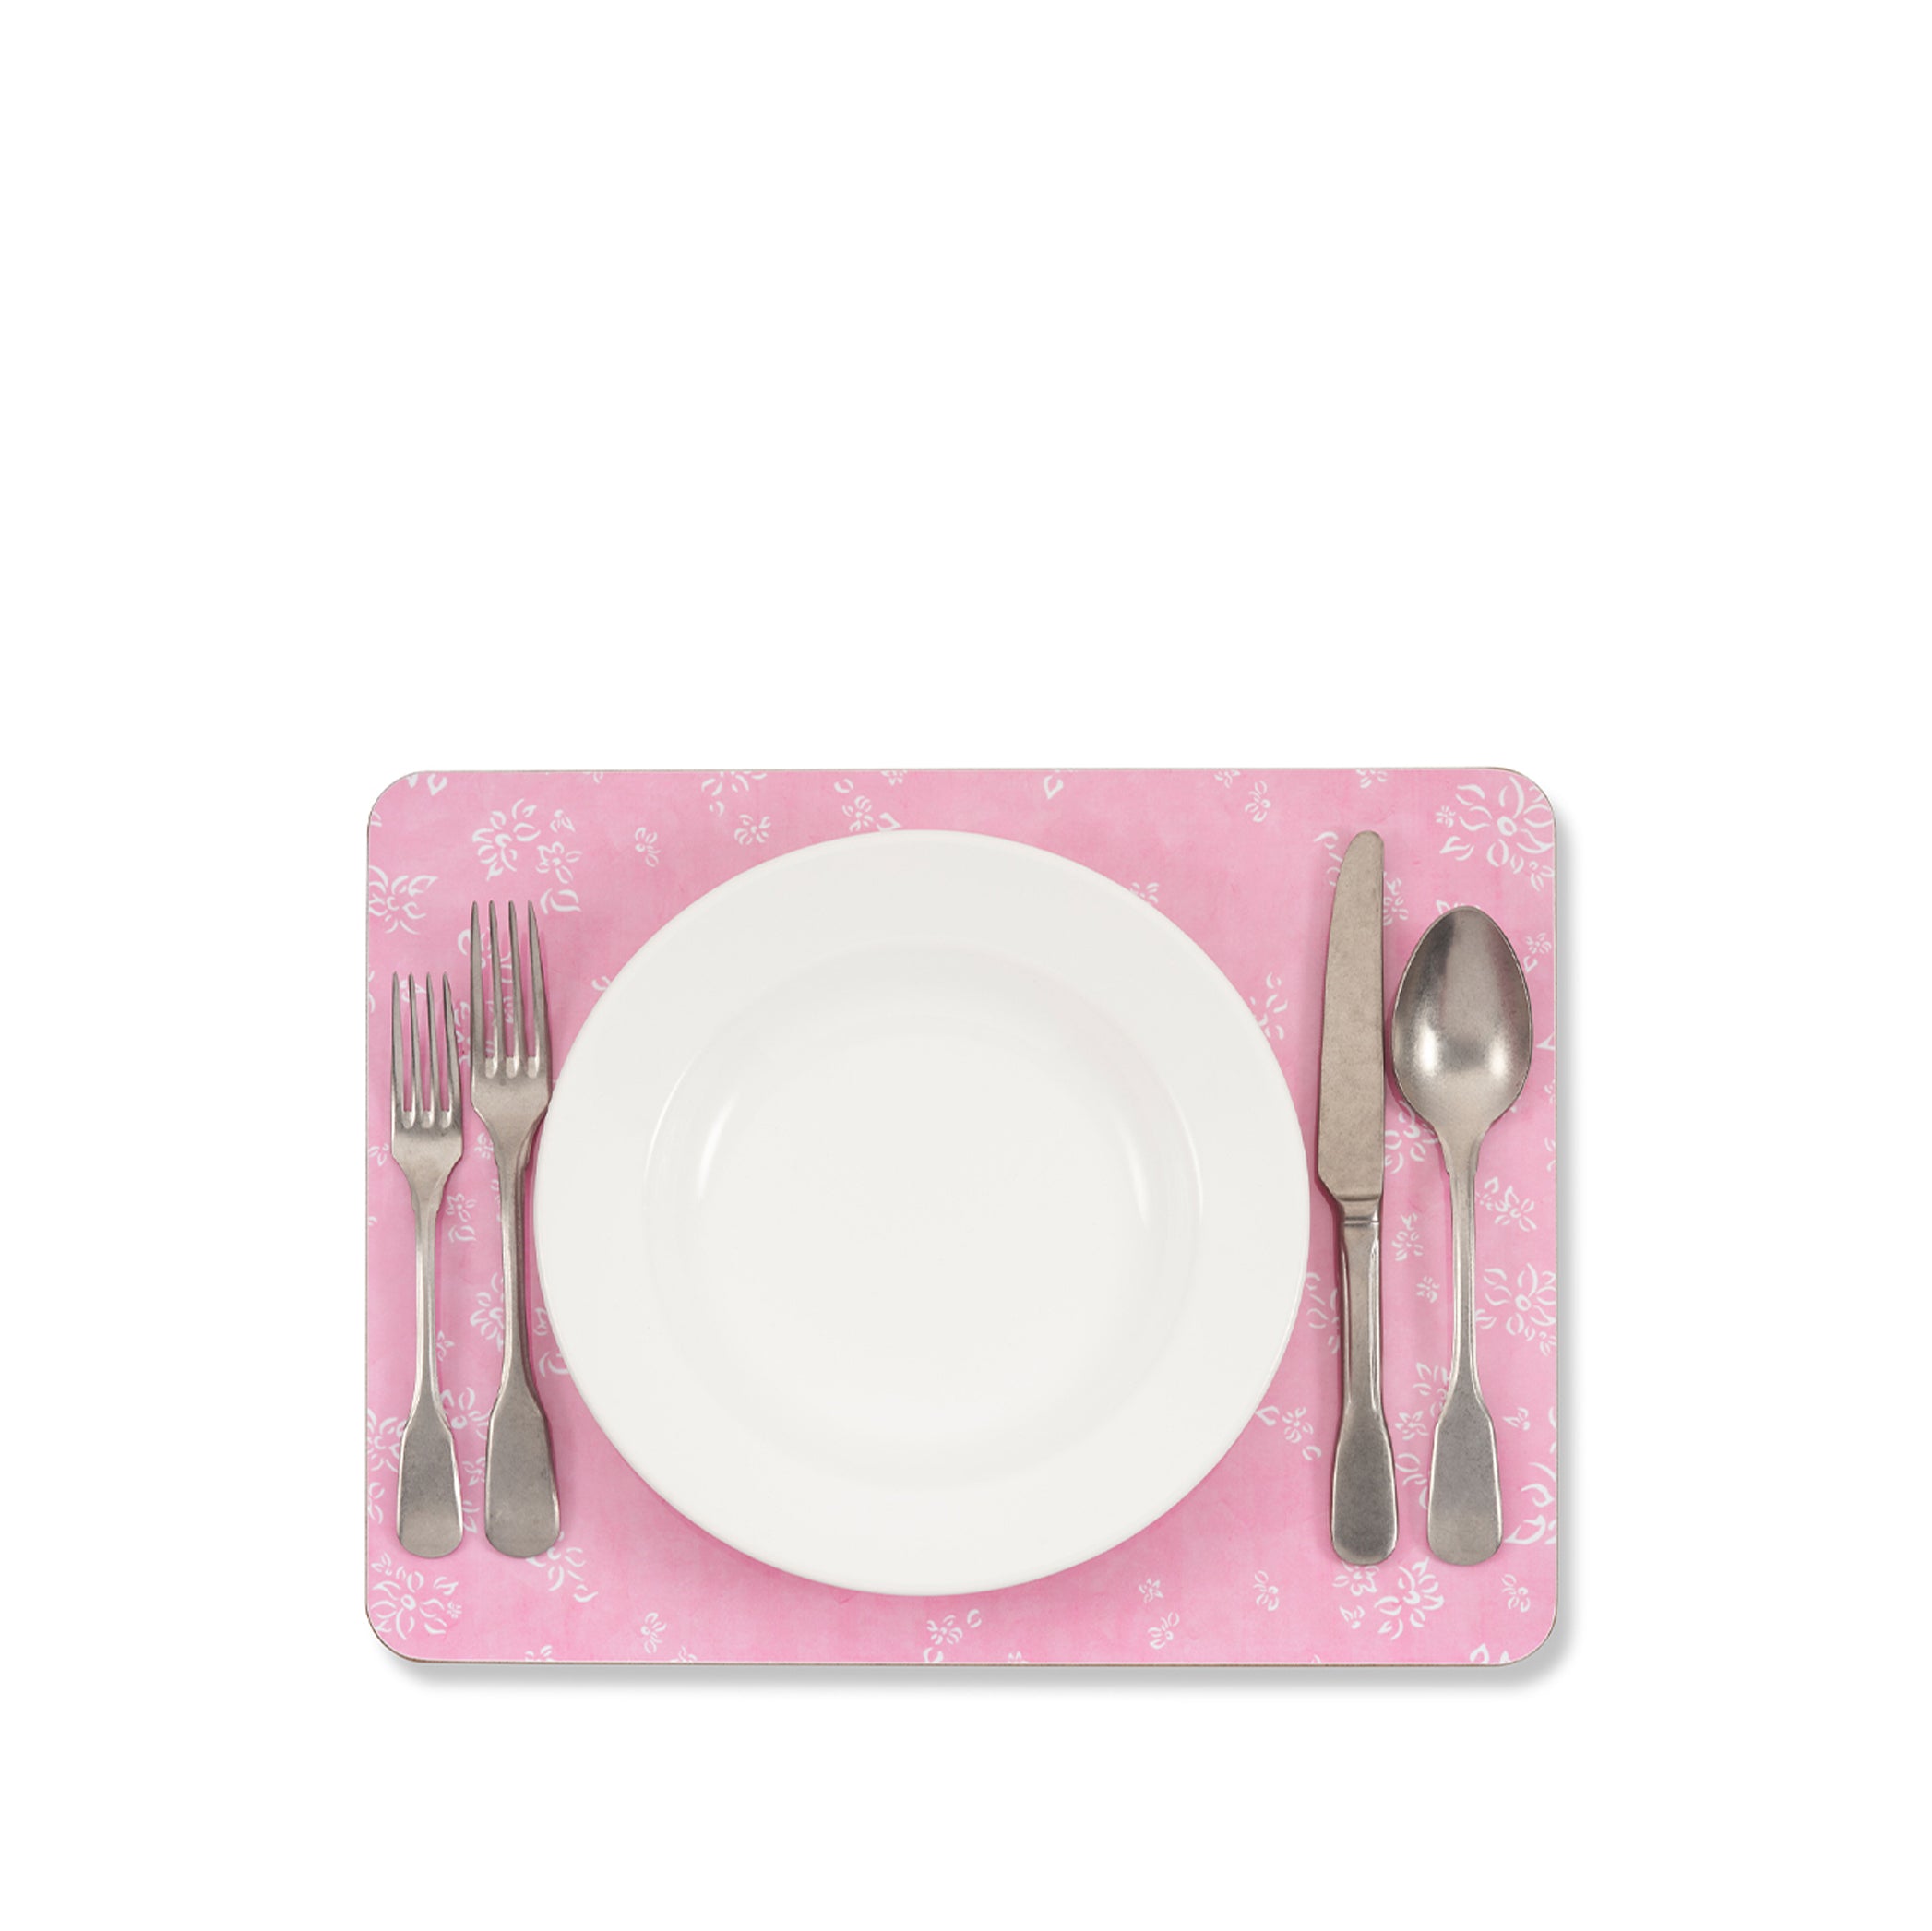 Falling Flower Cork-Backed Placemat in Pale Pink